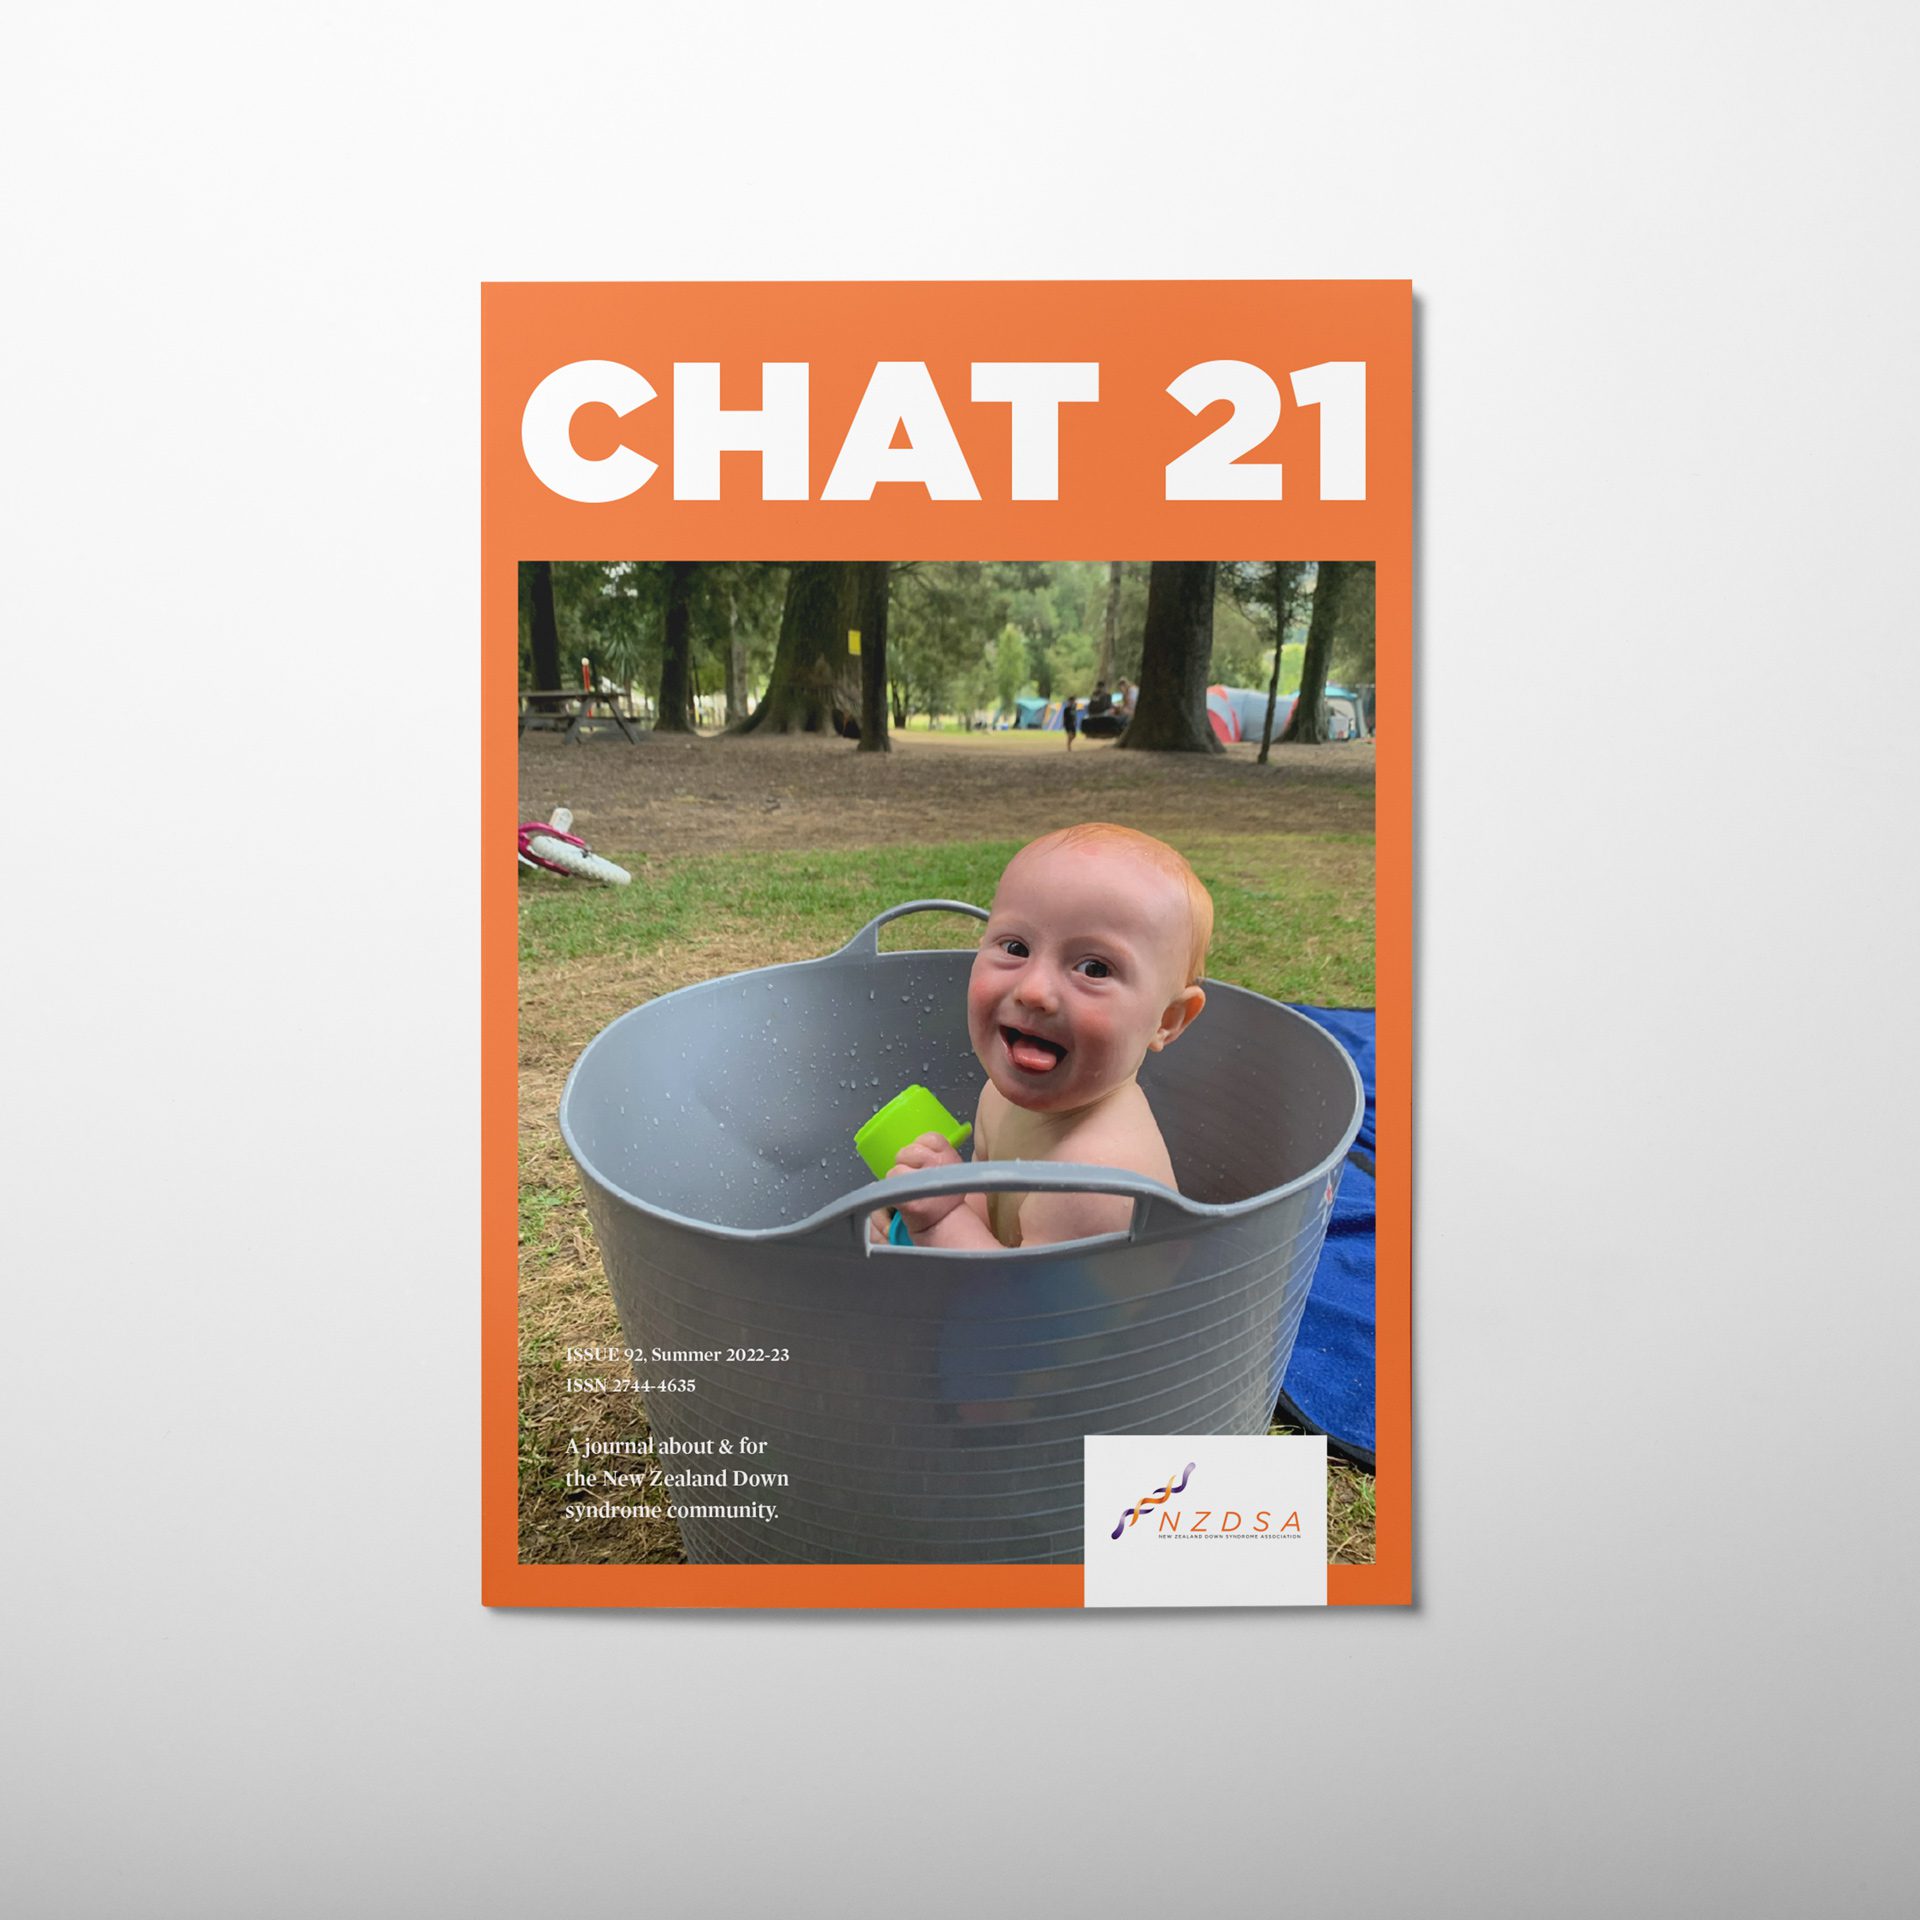 CHAT 21 Summer 2023